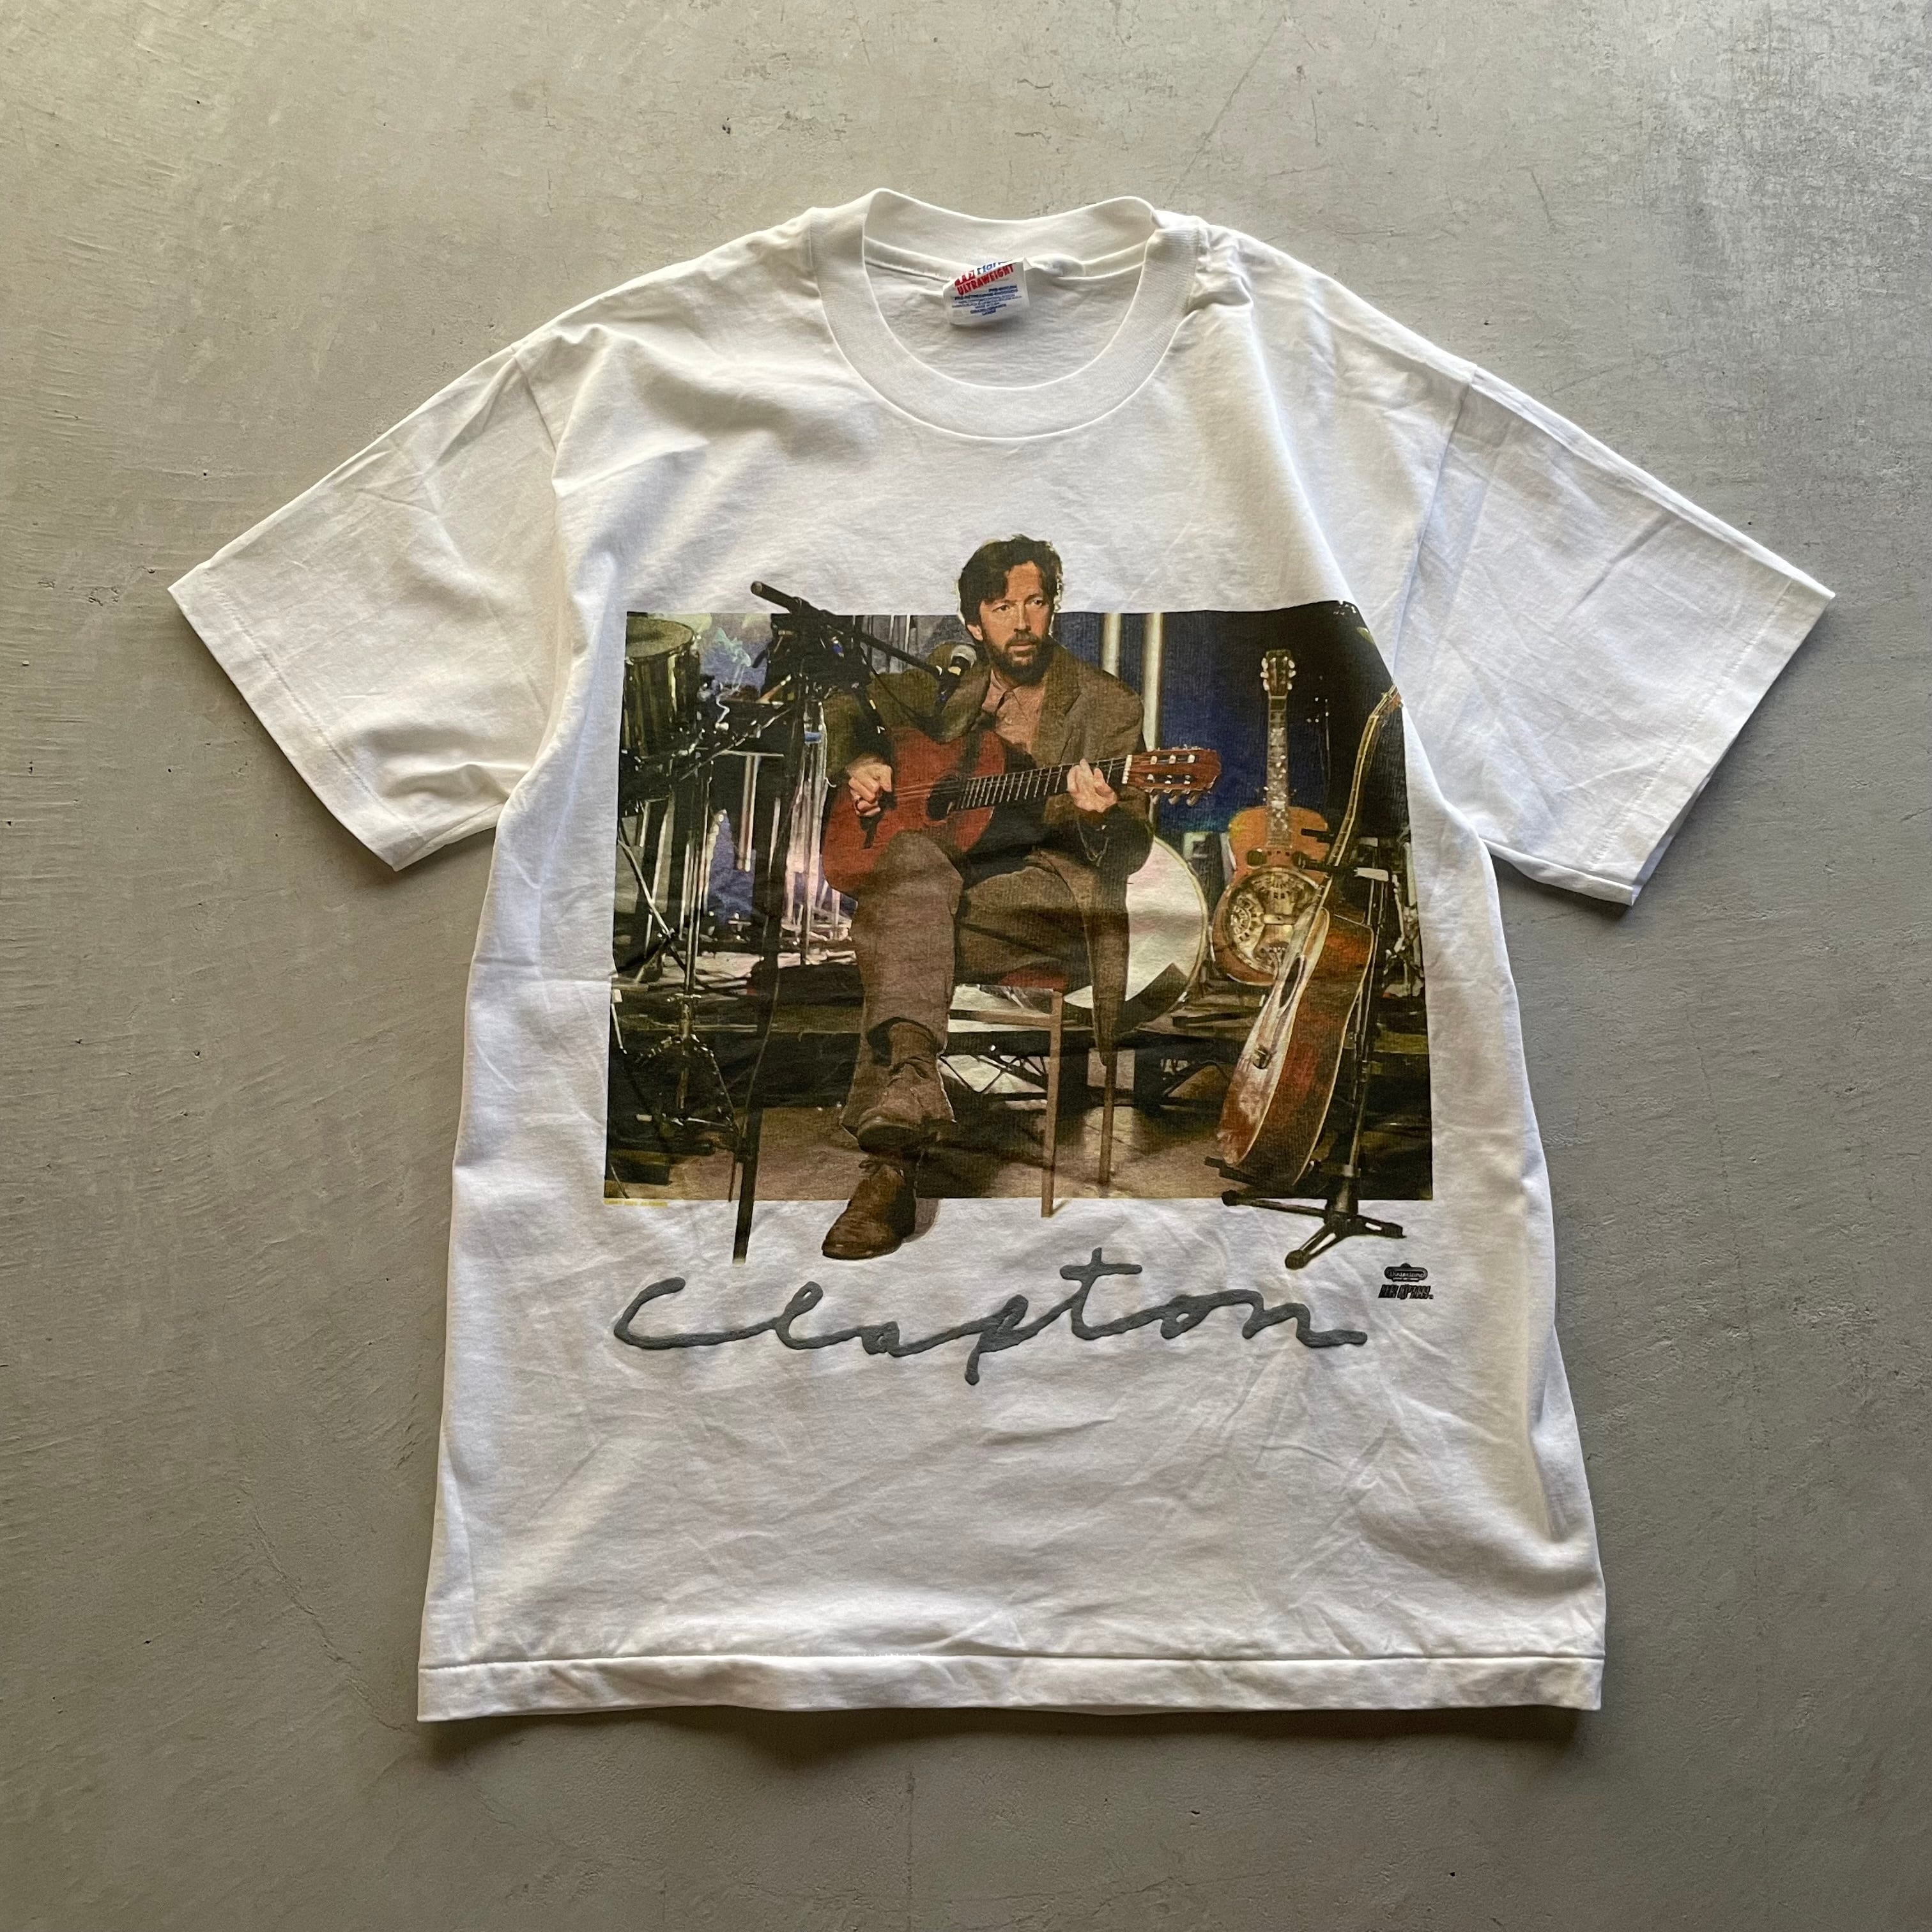 ERIC CLAPTON/1993s tour T-shirt made in USA エリッククラプトン ツアーＴ アメリカ製 BA228